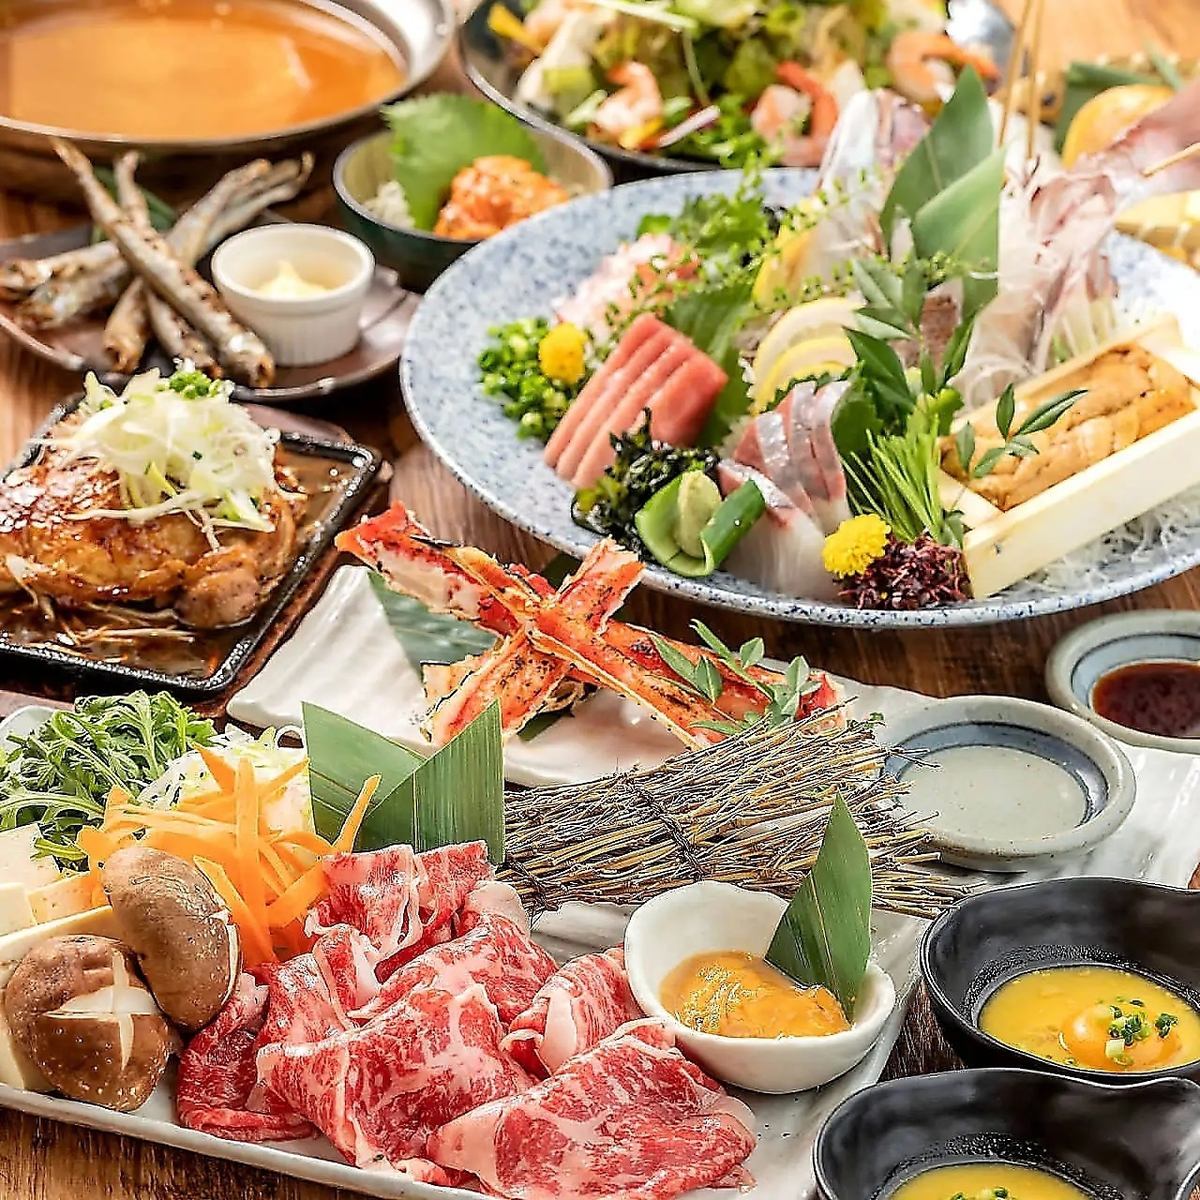 Courses where you can enjoy seasonal cuisine and Kyushu local cuisine start from 3,000 yen (tax included)